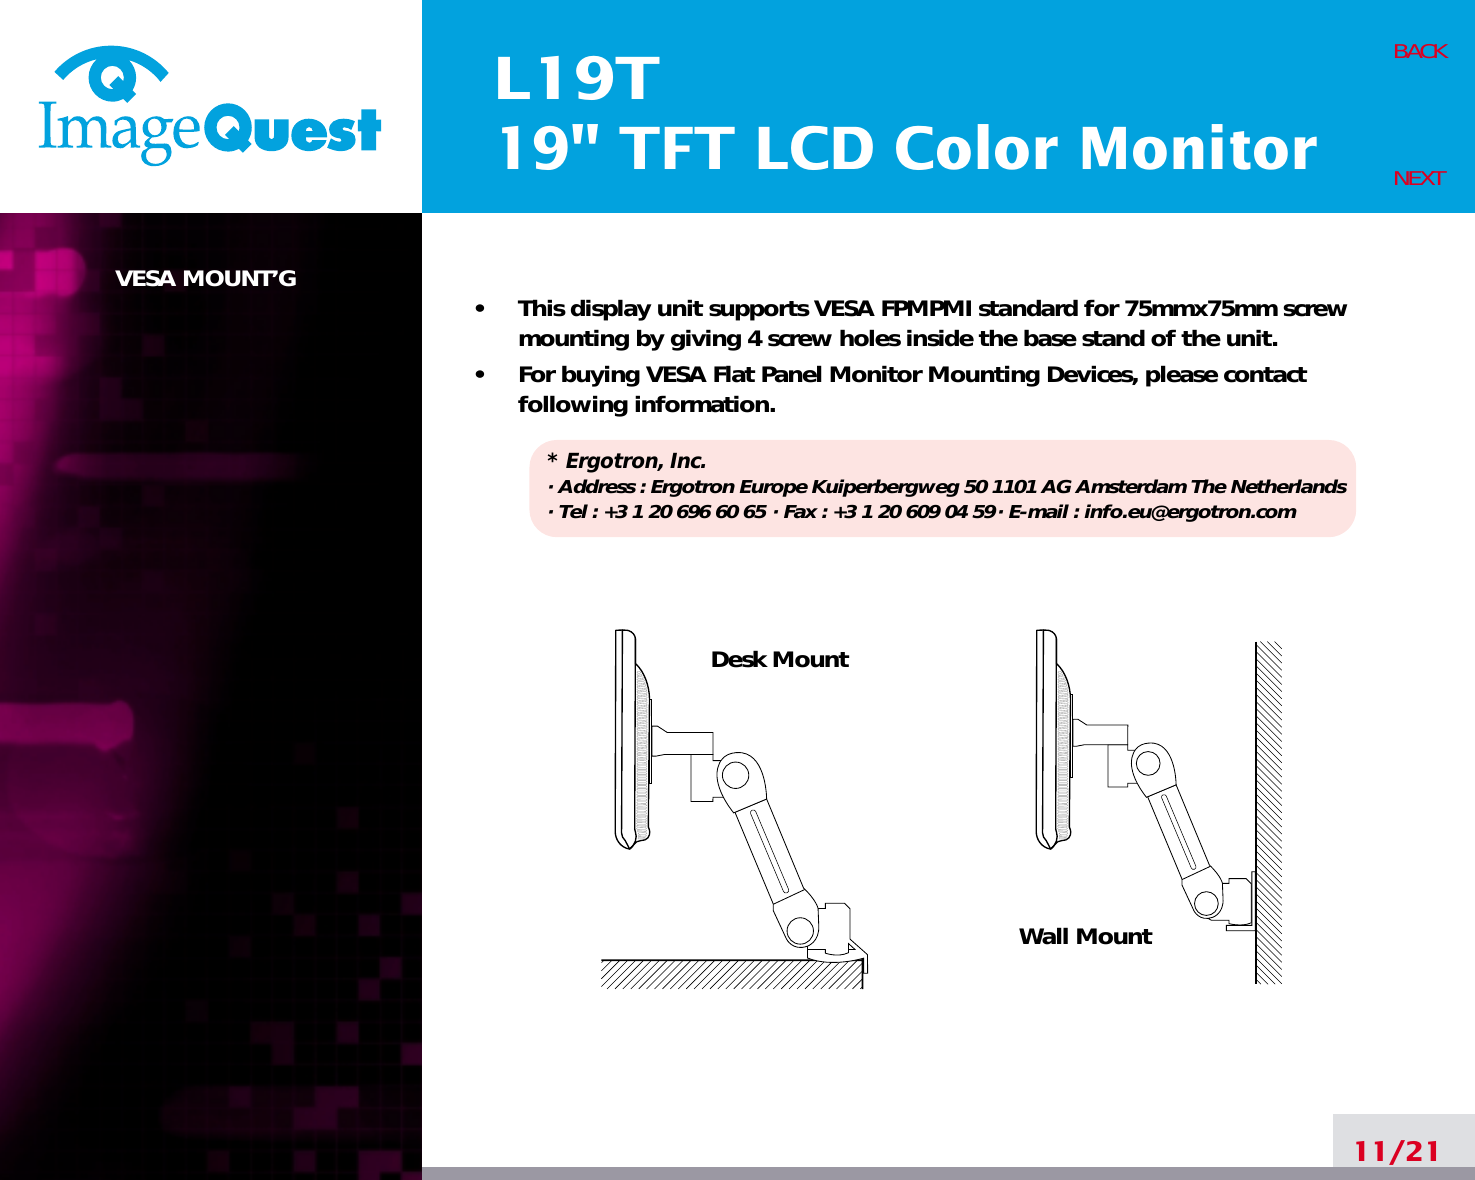 L19T19&quot; TFT LCD Color MonitorVESA MOUNT’G•     This display unit supports VESA FPMPMI standard for 75mmx75mm screwmounting by giving 4 screw holes inside the base stand of the unit.•     For buying VESA Flat Panel Monitor Mounting Devices, please contactfollowing information.* Ergotron, Inc.· Address : Ergotron Europe Kuiperbergweg 50 1101 AG Amsterdam The Netherlands· Tel : +3 1 20 696 60 65 · Fax : +3 1 20 609 04 59· E-mail : info.eu@ergotron.com11/21BACKNEXTDesk MountWall Mount